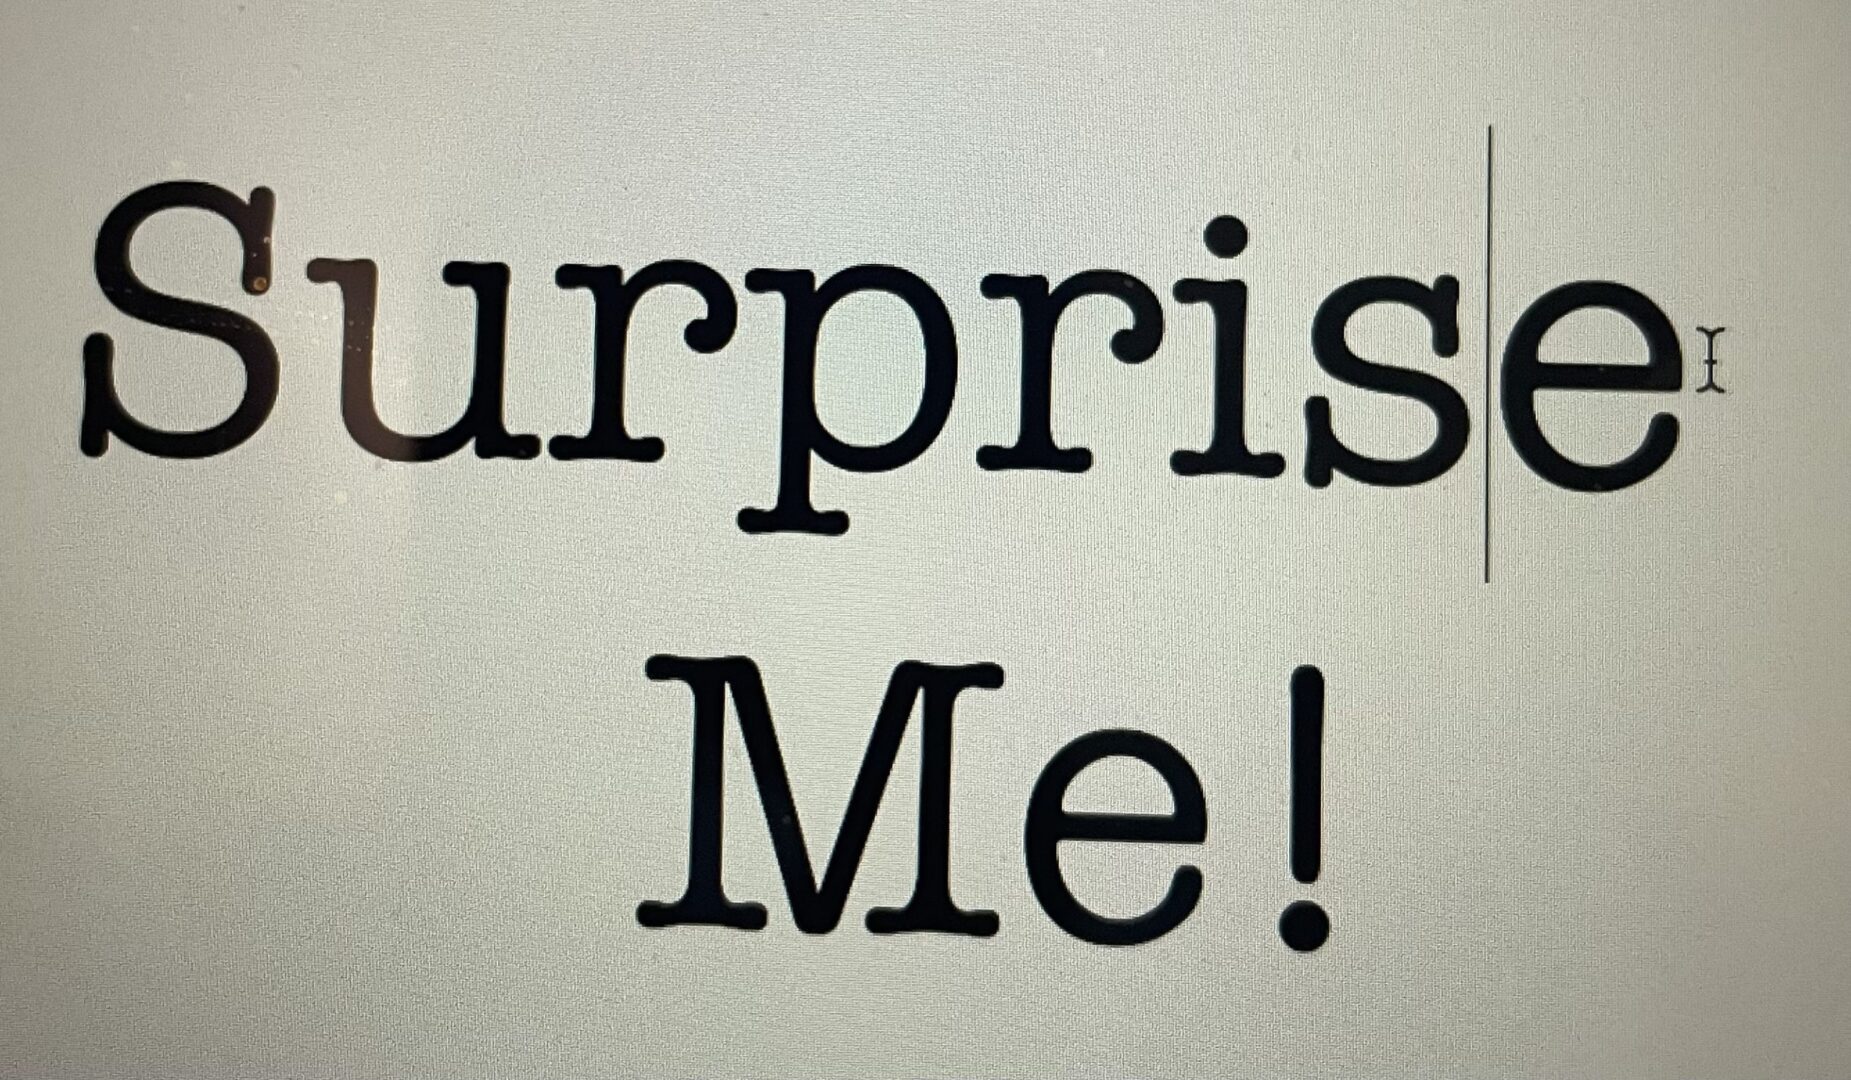 The words “Surprise Me!”